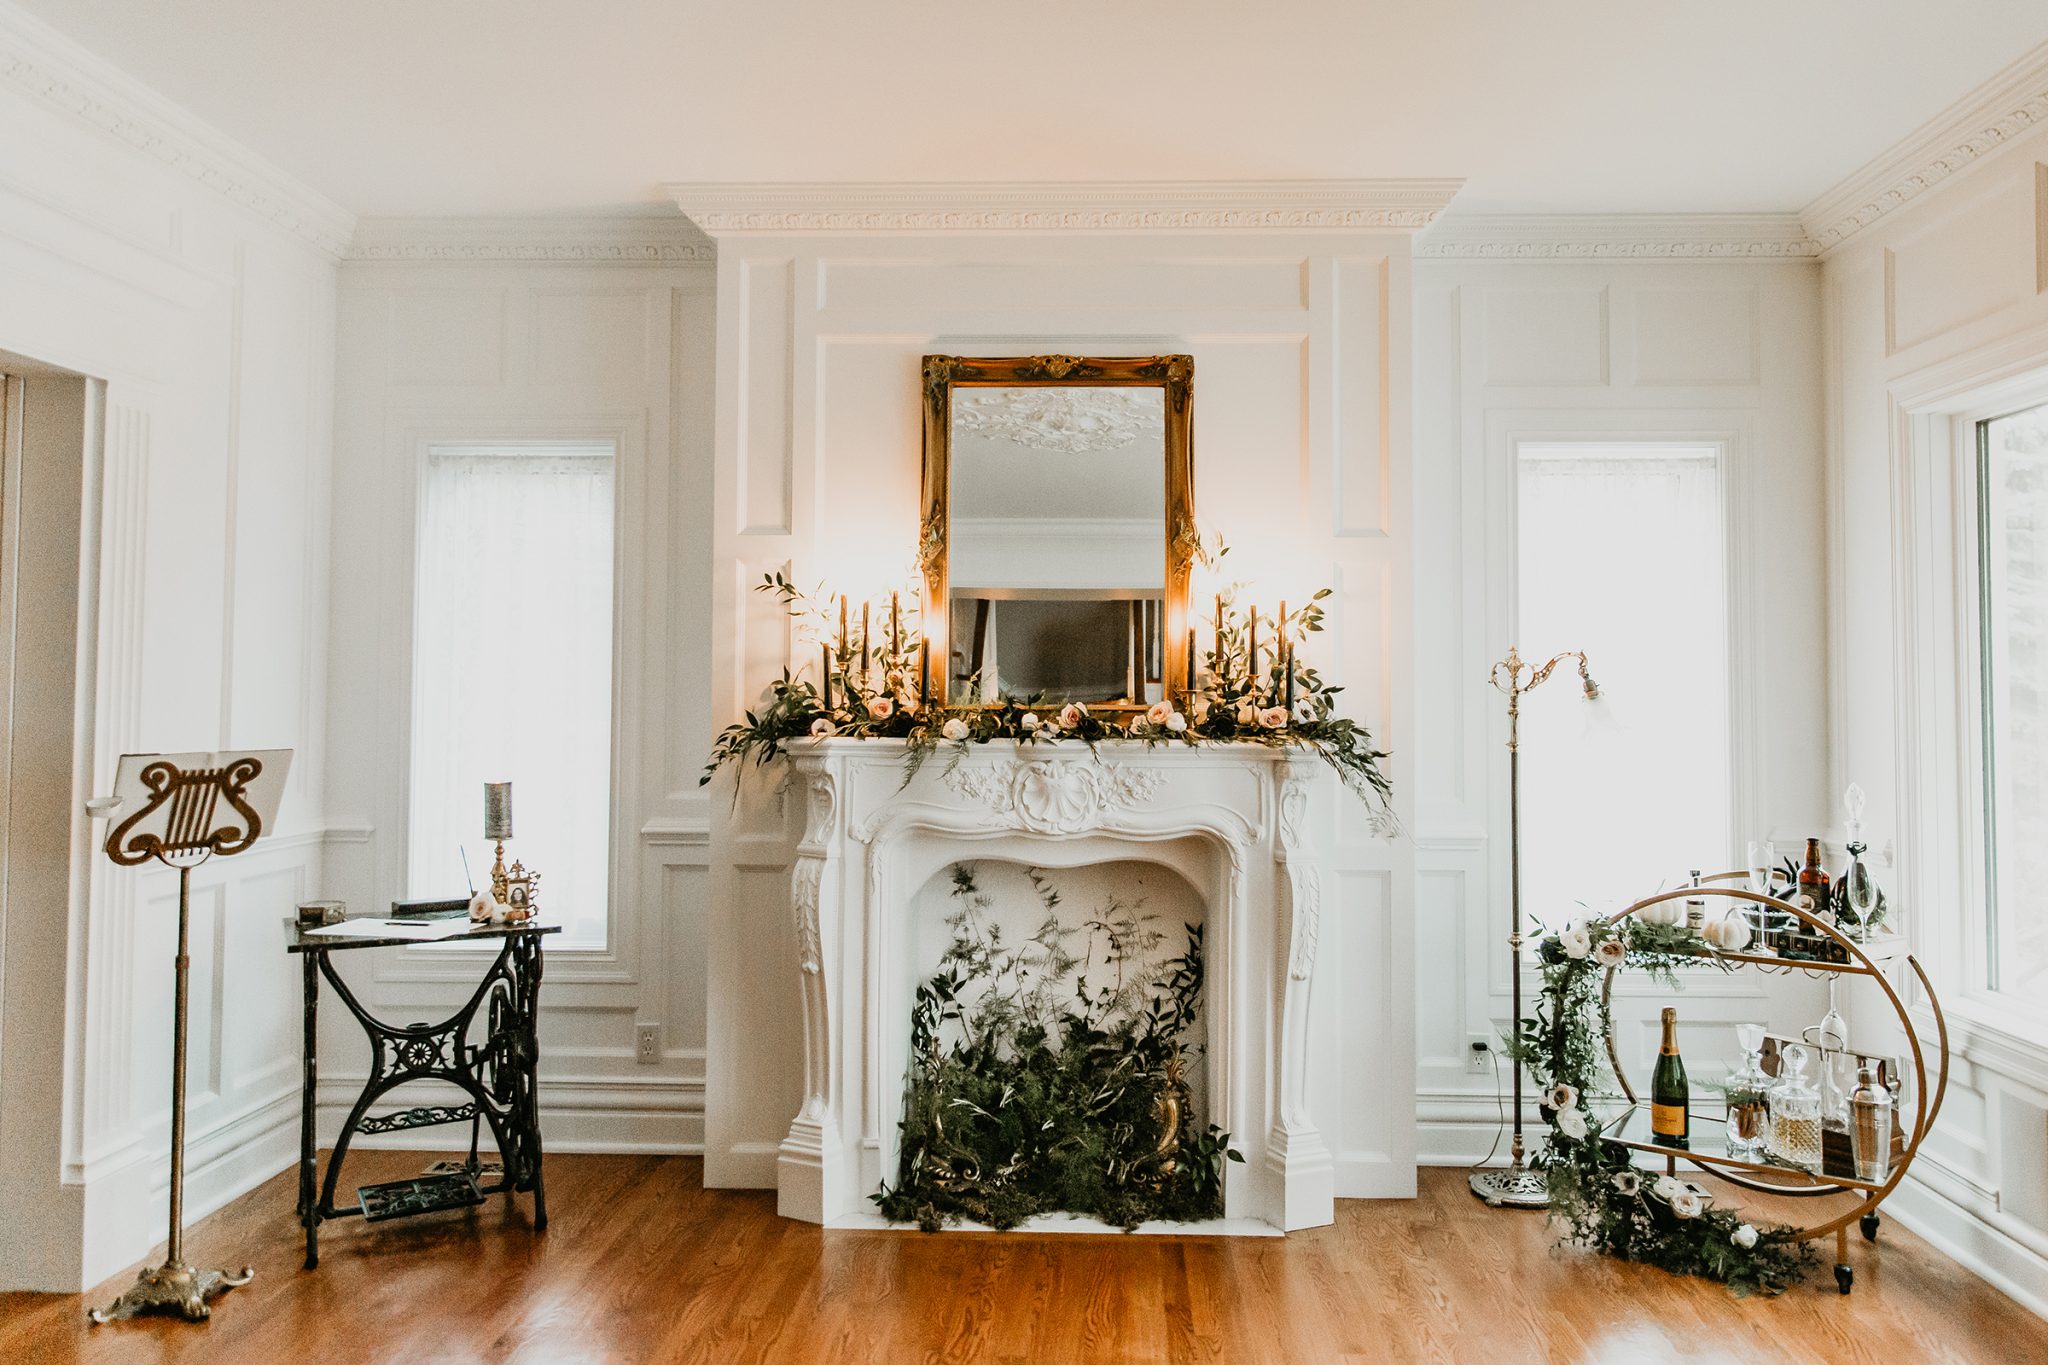 This St. Albert Living Room Minimony Exemplifies Everything We Love About Intimate Weddings - Brontë Bride